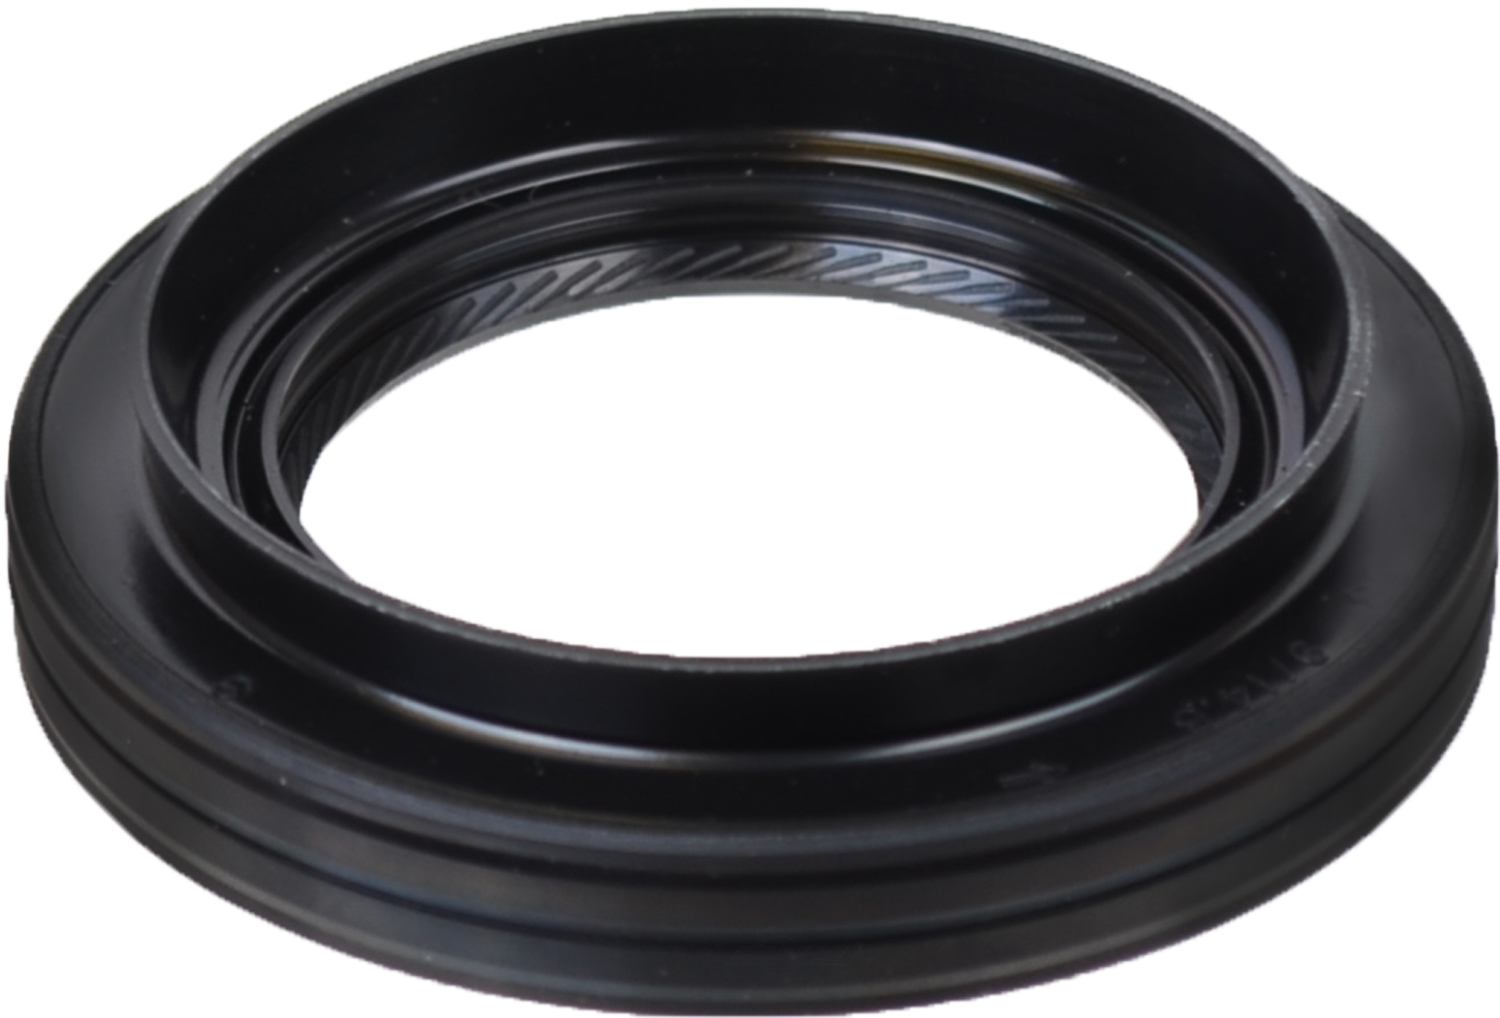 SKF (CHICAGO RAWHIDE) - Manual Trans Output Shaft Seal (Left) - SKF 15925A